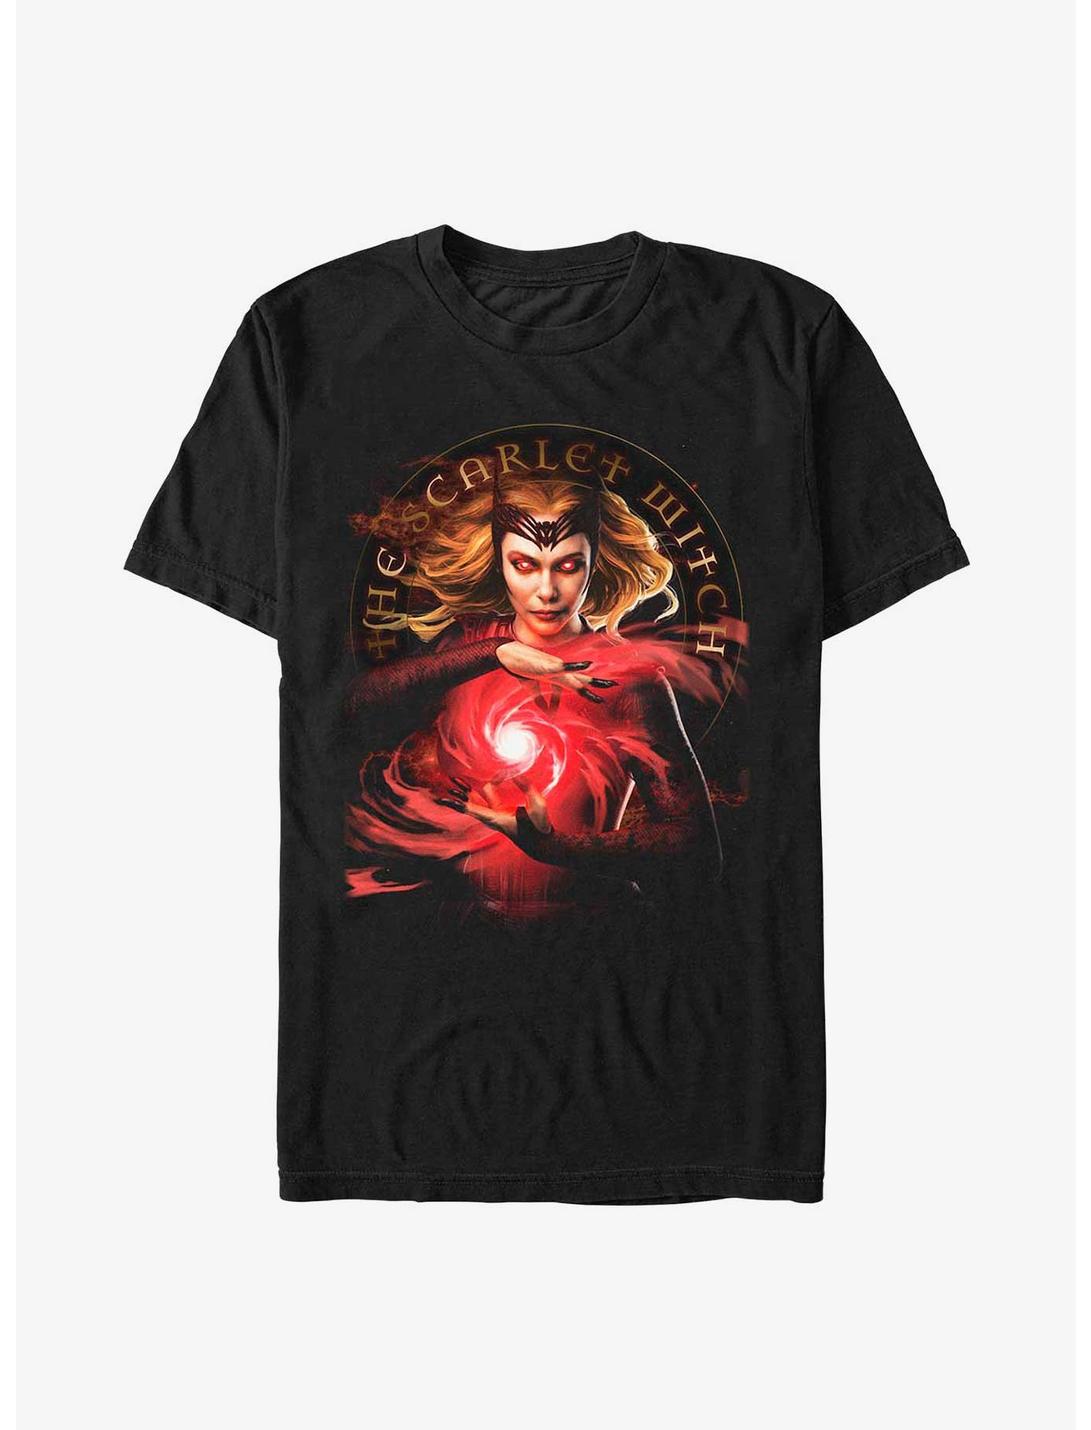 Marvel Doctor Strange in the Multiverse of Madness The Scarlet Witch T-Shirt, BLACK, hi-res